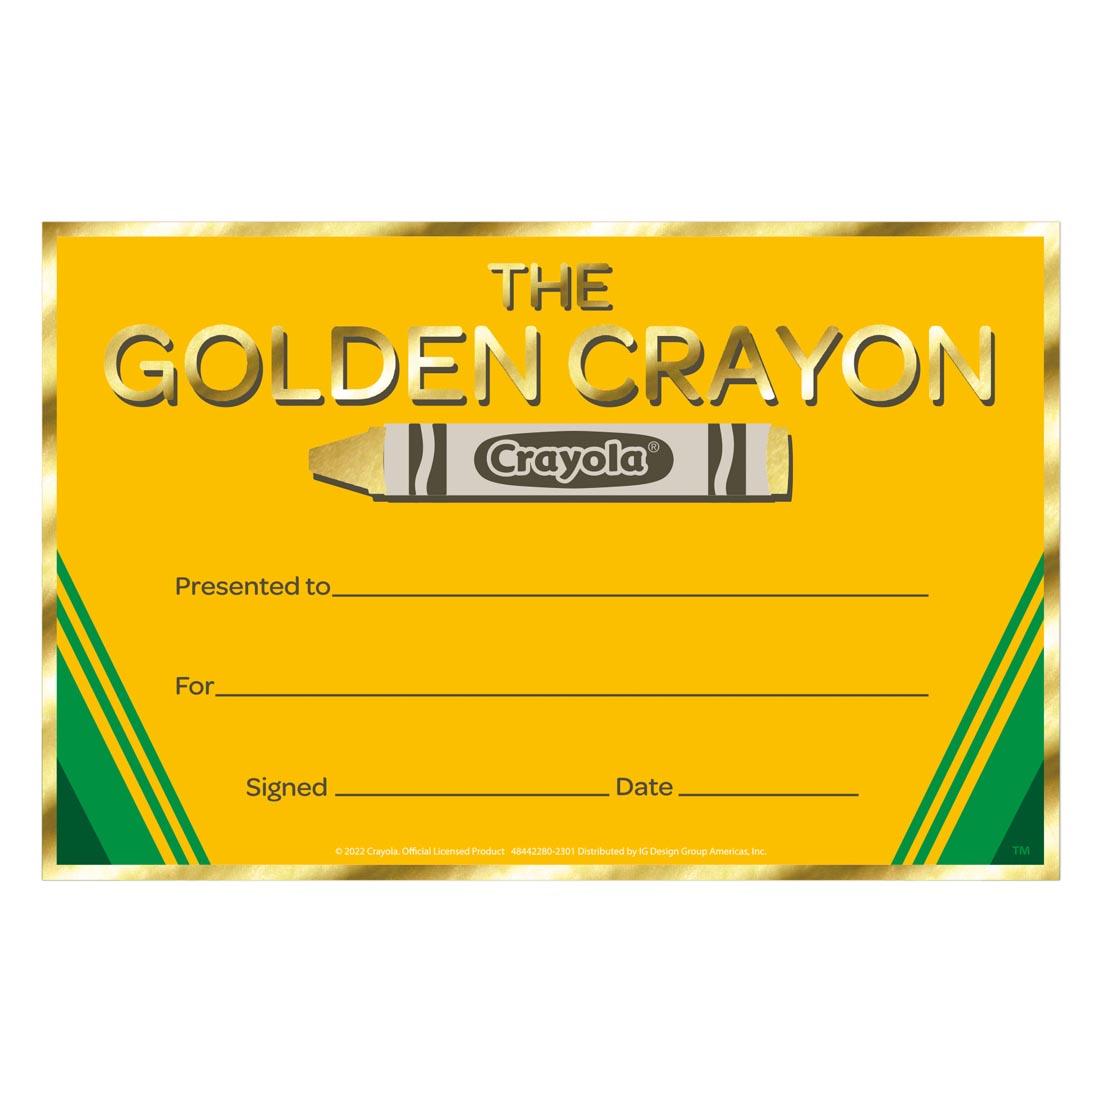 The Golden Crayon Award From The Crayola Collection By Eureka